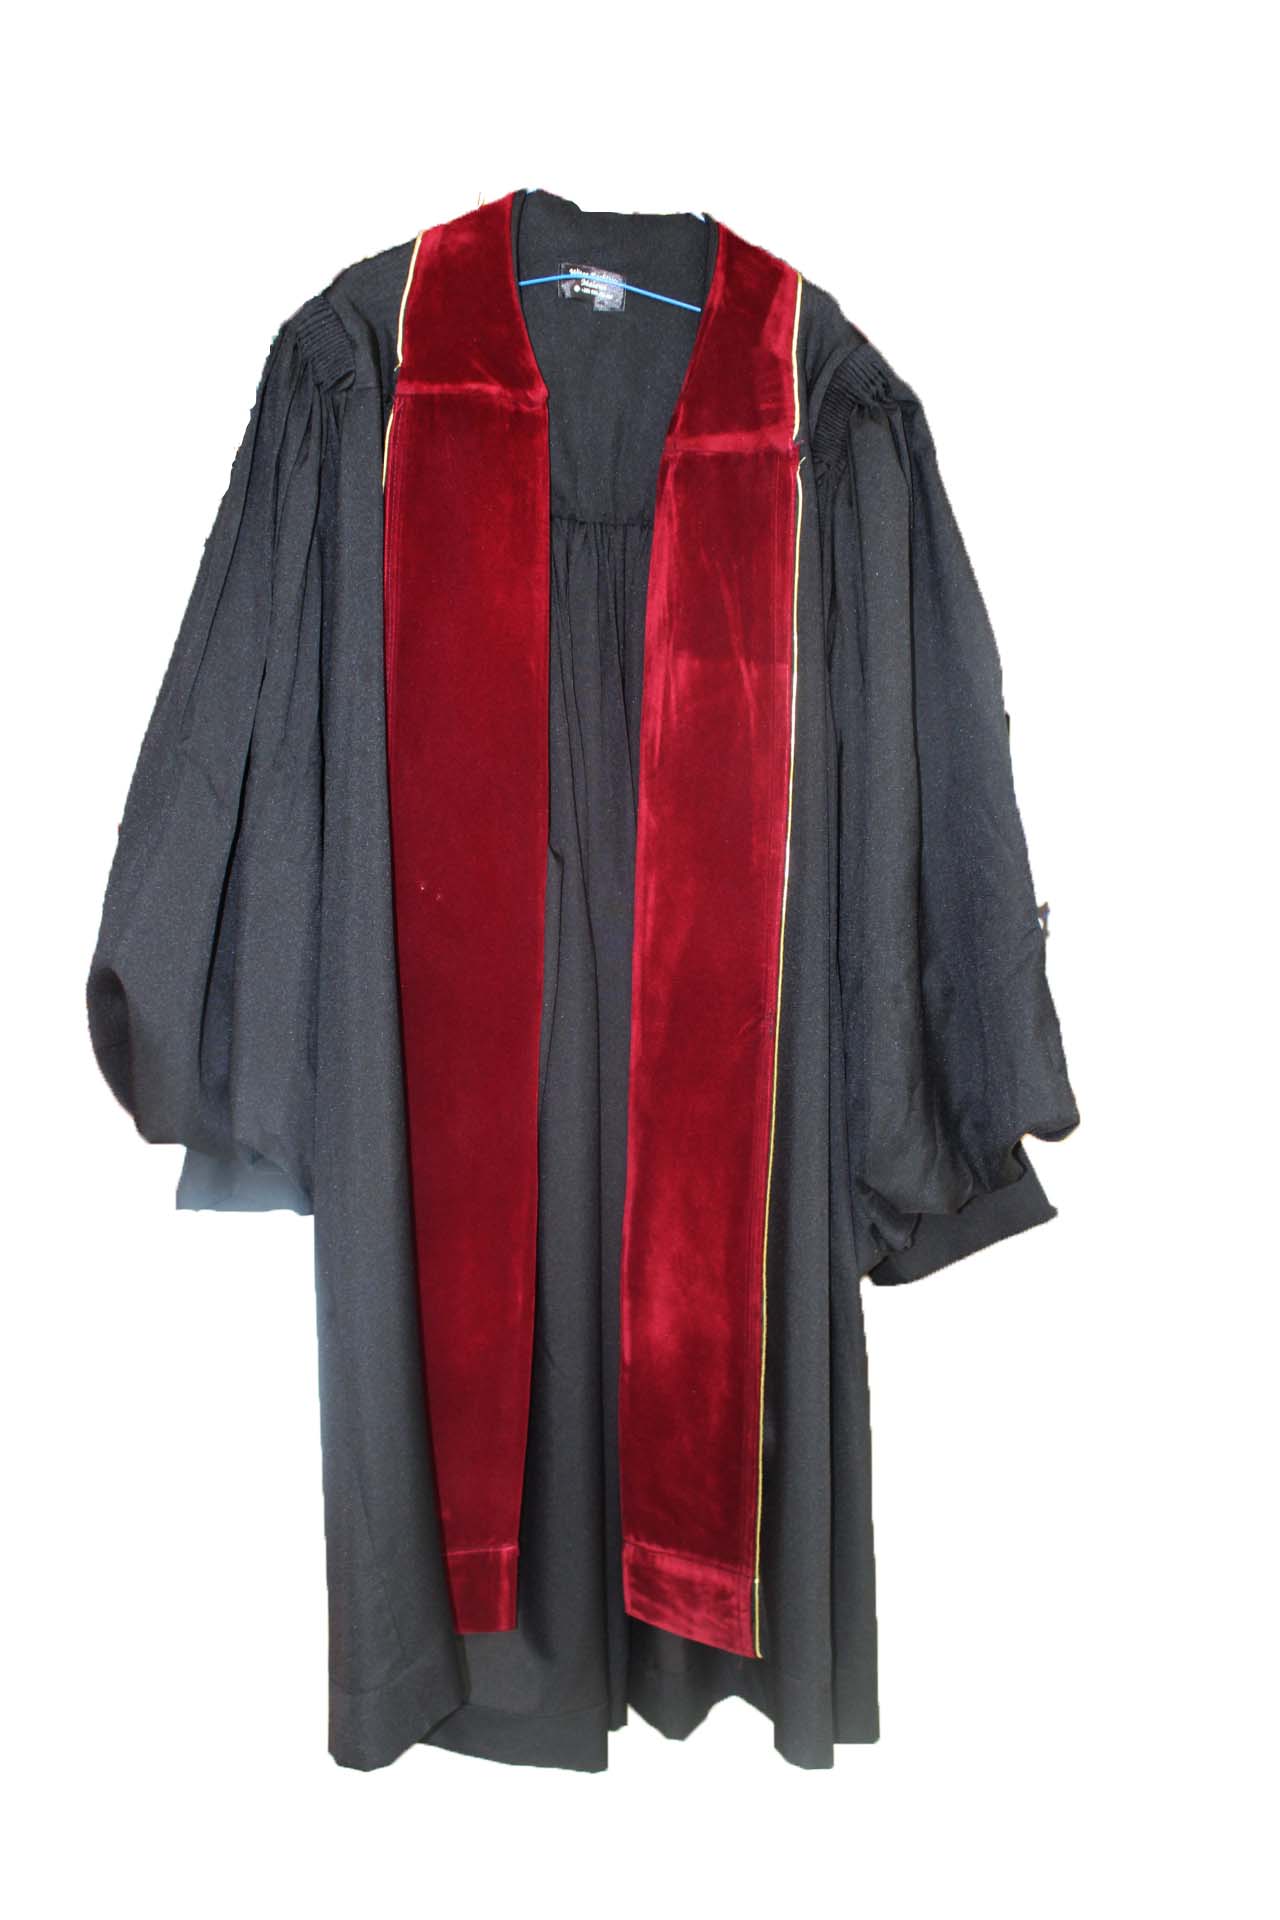 Doctoral Graduation Gown With Gold Piping